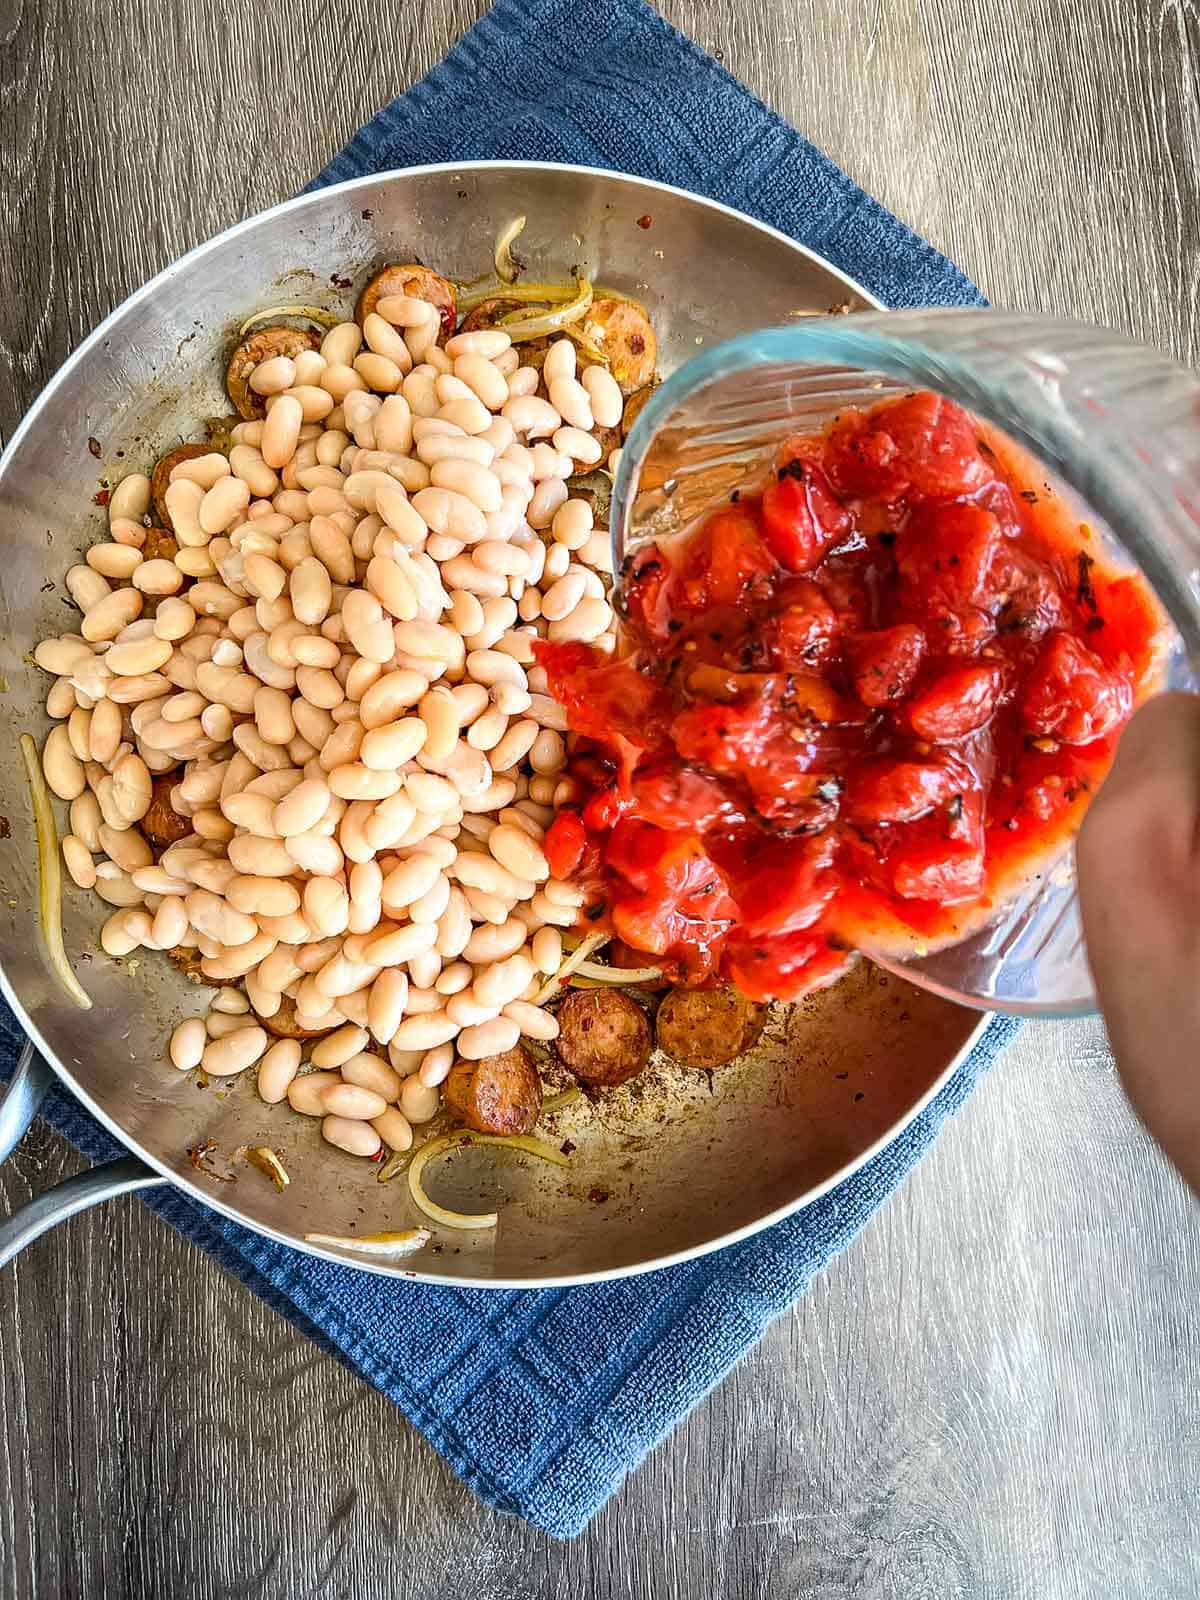 Adding the tomatoes and beans to the skillet.